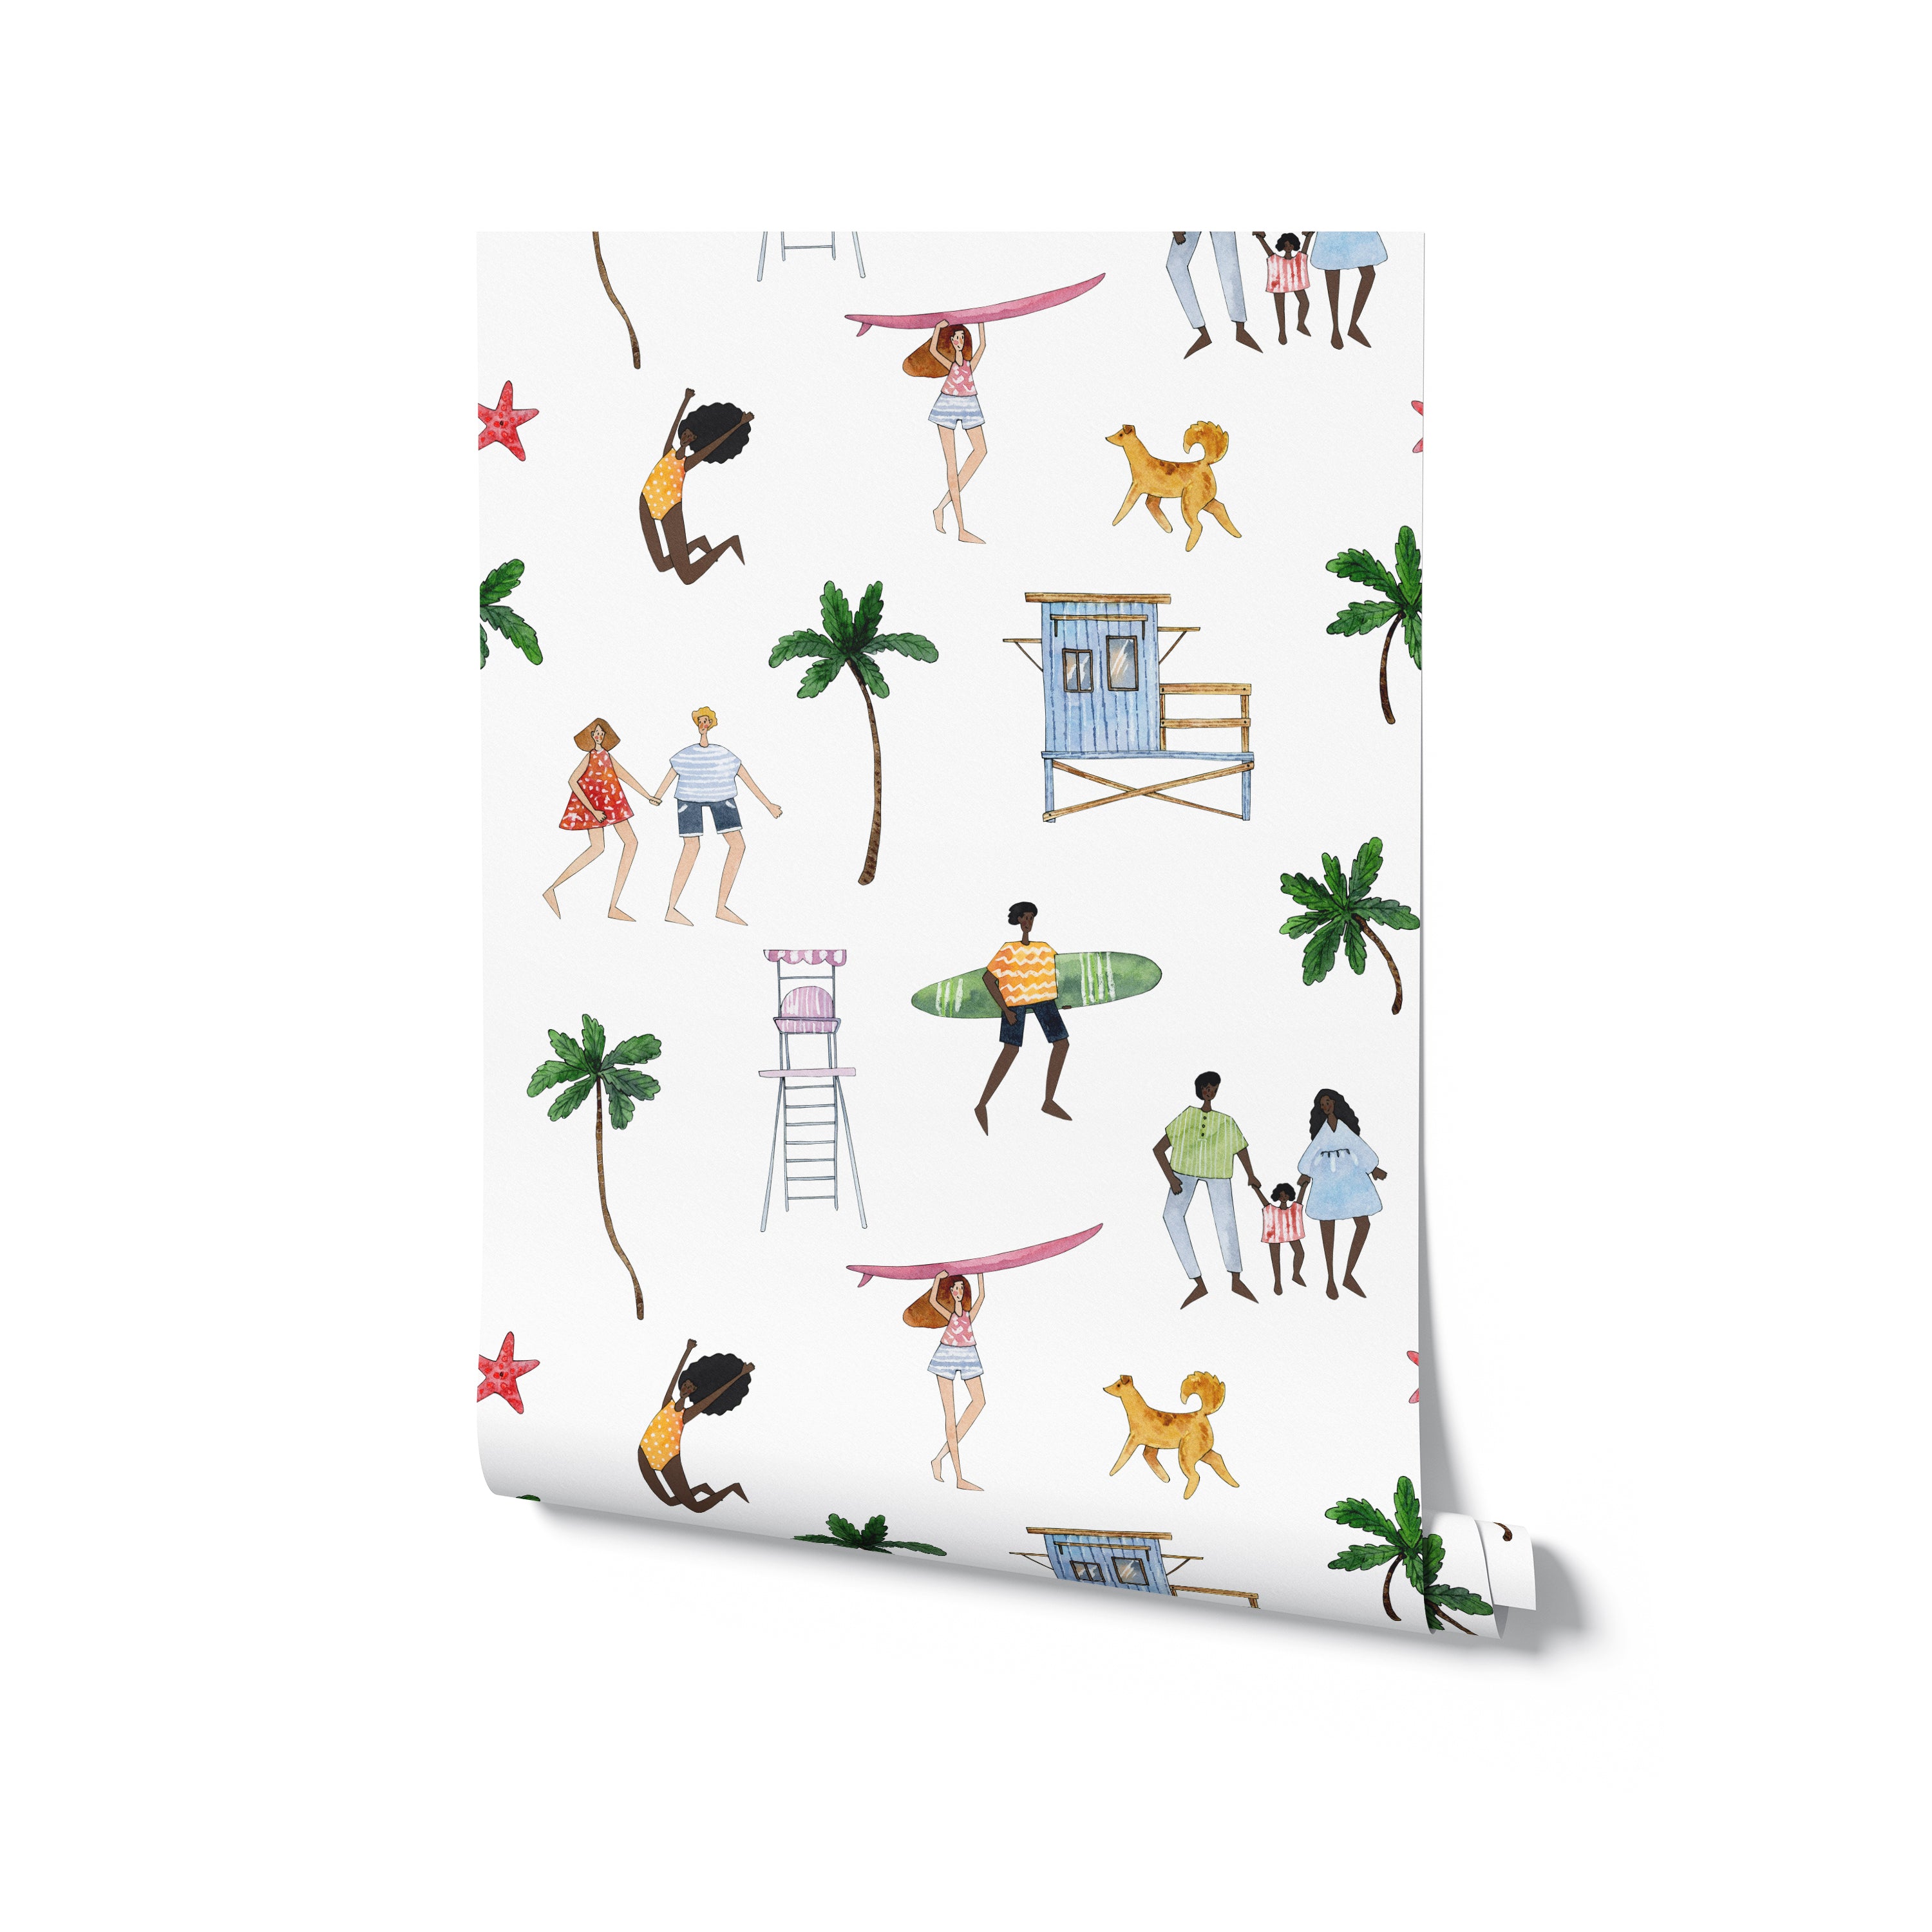 A rolled panel of the Beach Party Wallpaper featuring a vibrant pattern of beachgoers, palm trees, and lifeguard huts, perfect for a playful summer theme.